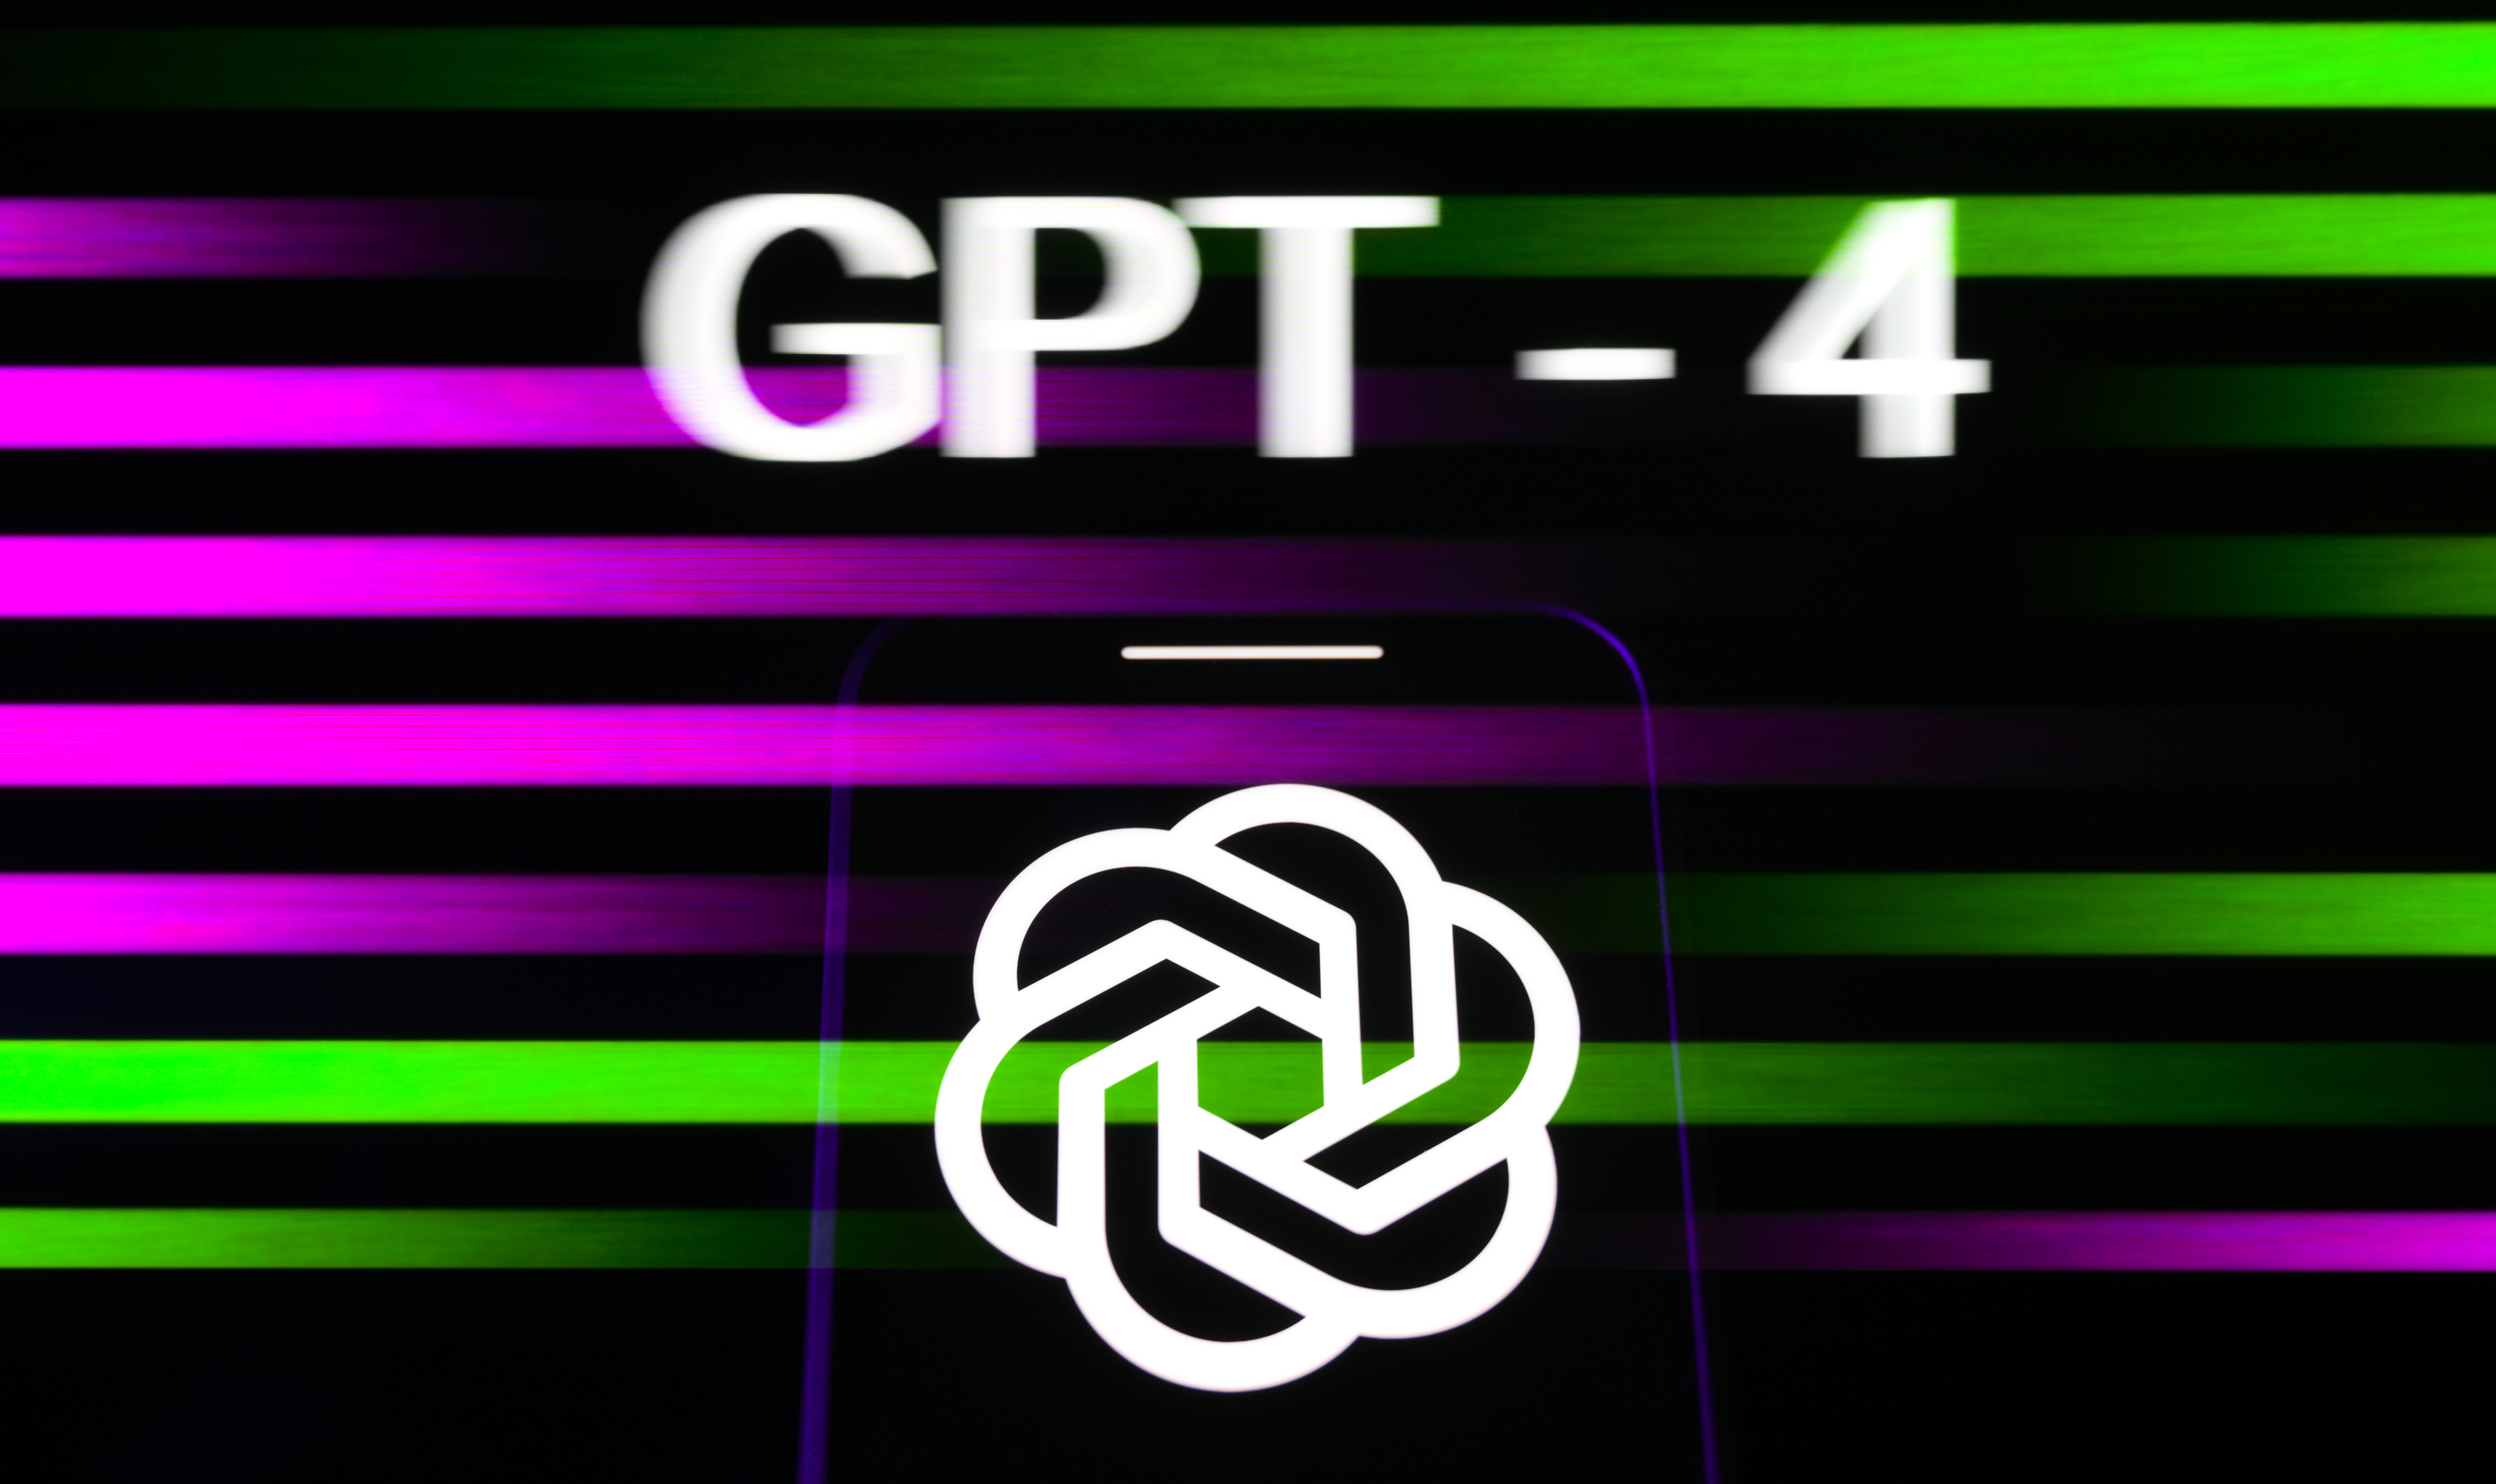 A graphic with horizontal purple and green lines, over which “GPT-4” and a flower shape are imposed.